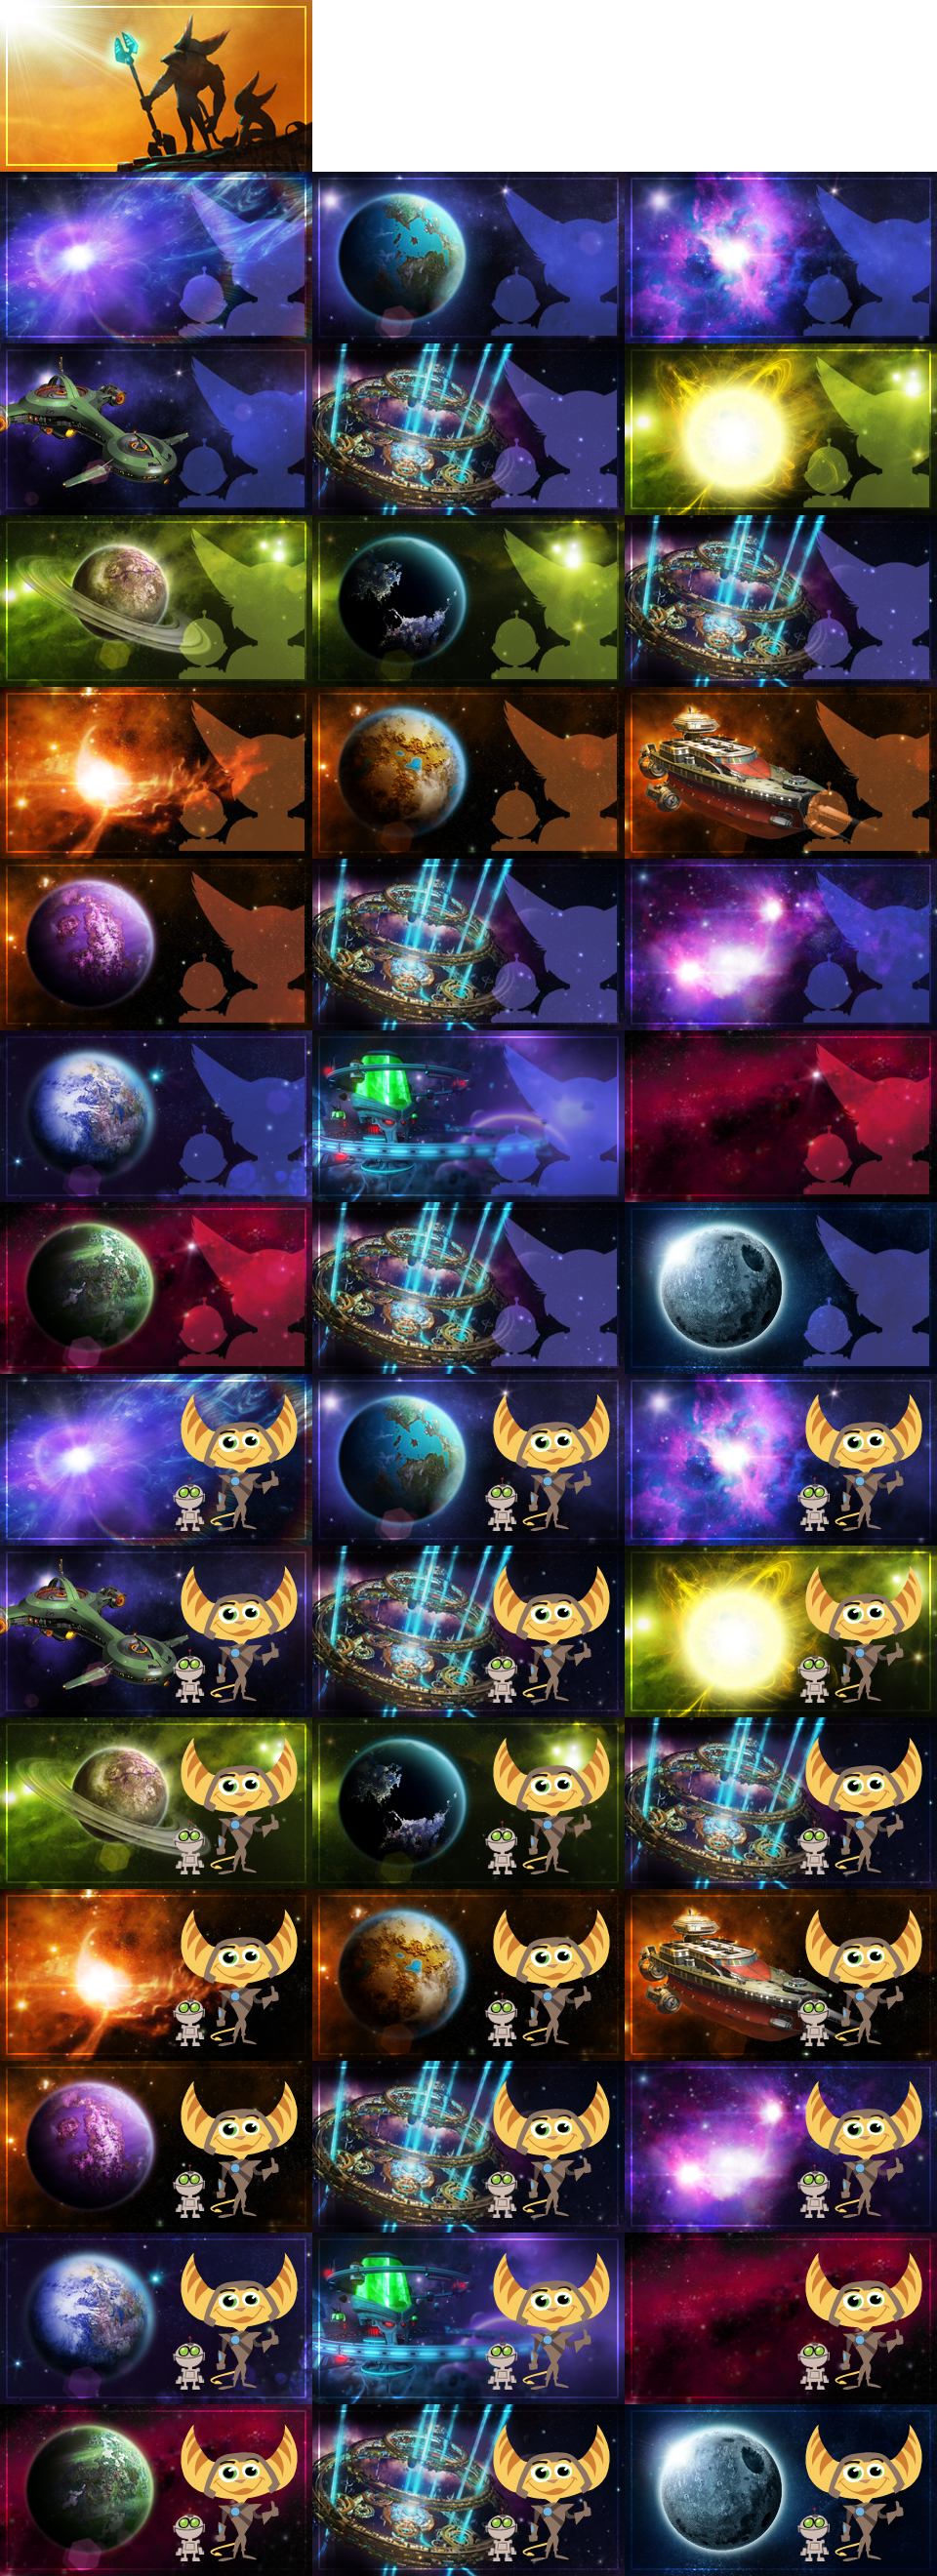 Ratchet & Clank Future: A Crack in Time - Save Icons